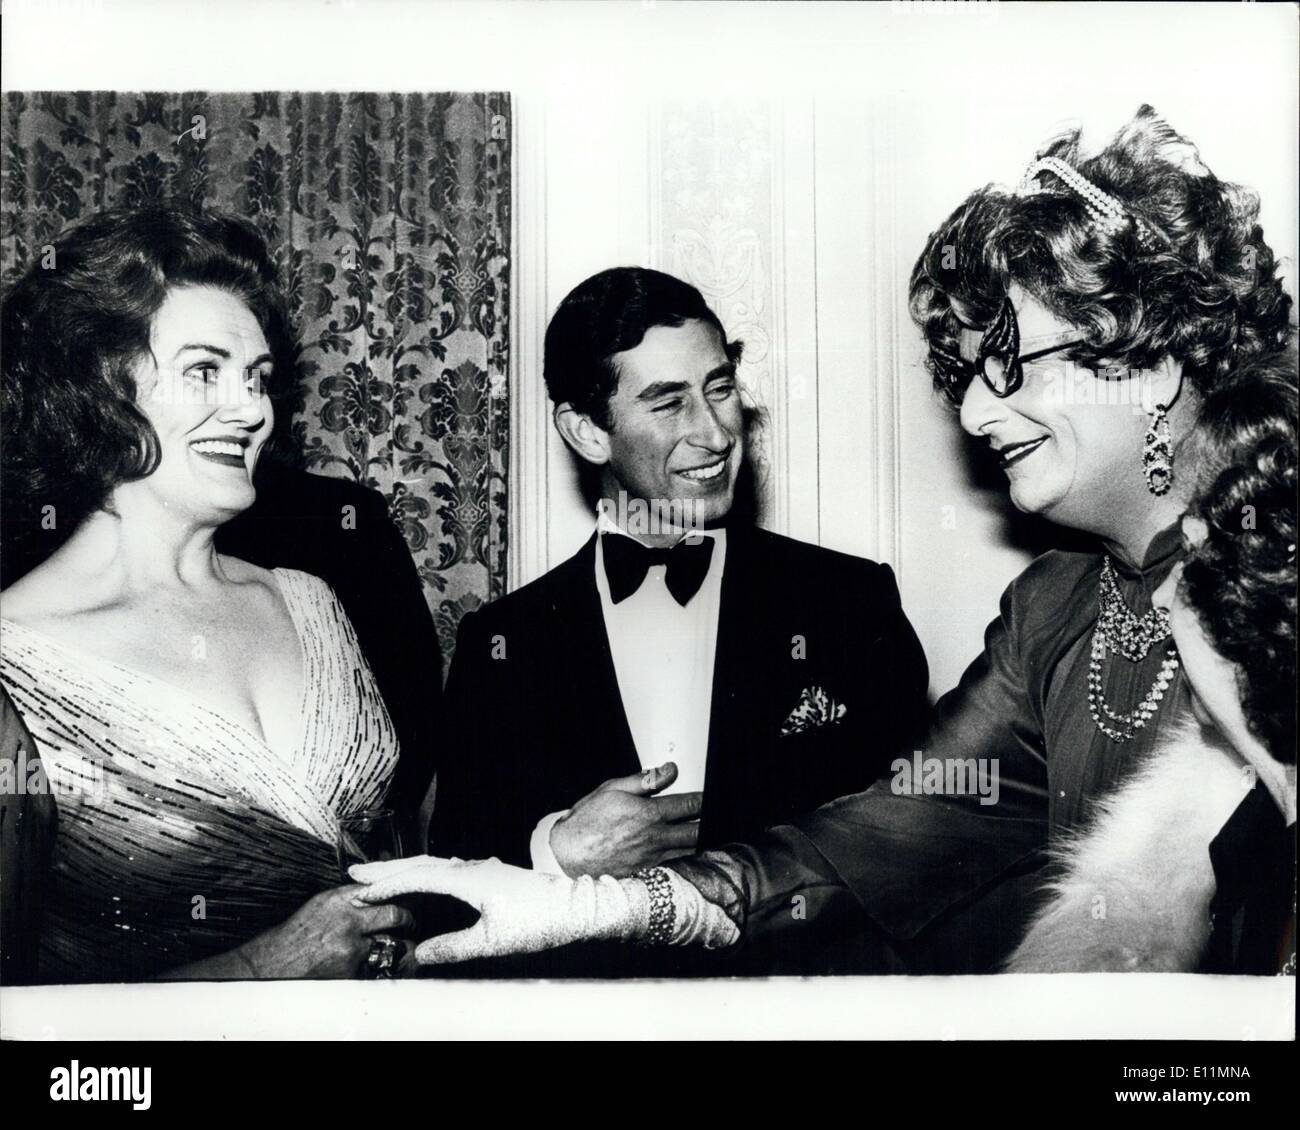 Nov. 27, 1978 - Joan Sutherland and Dame Edna Evarage (alias Barry Humphries) swop jokes while Prince Charles looks on amused at the Royal Opera House, Covent Garden last night. Stock Photo